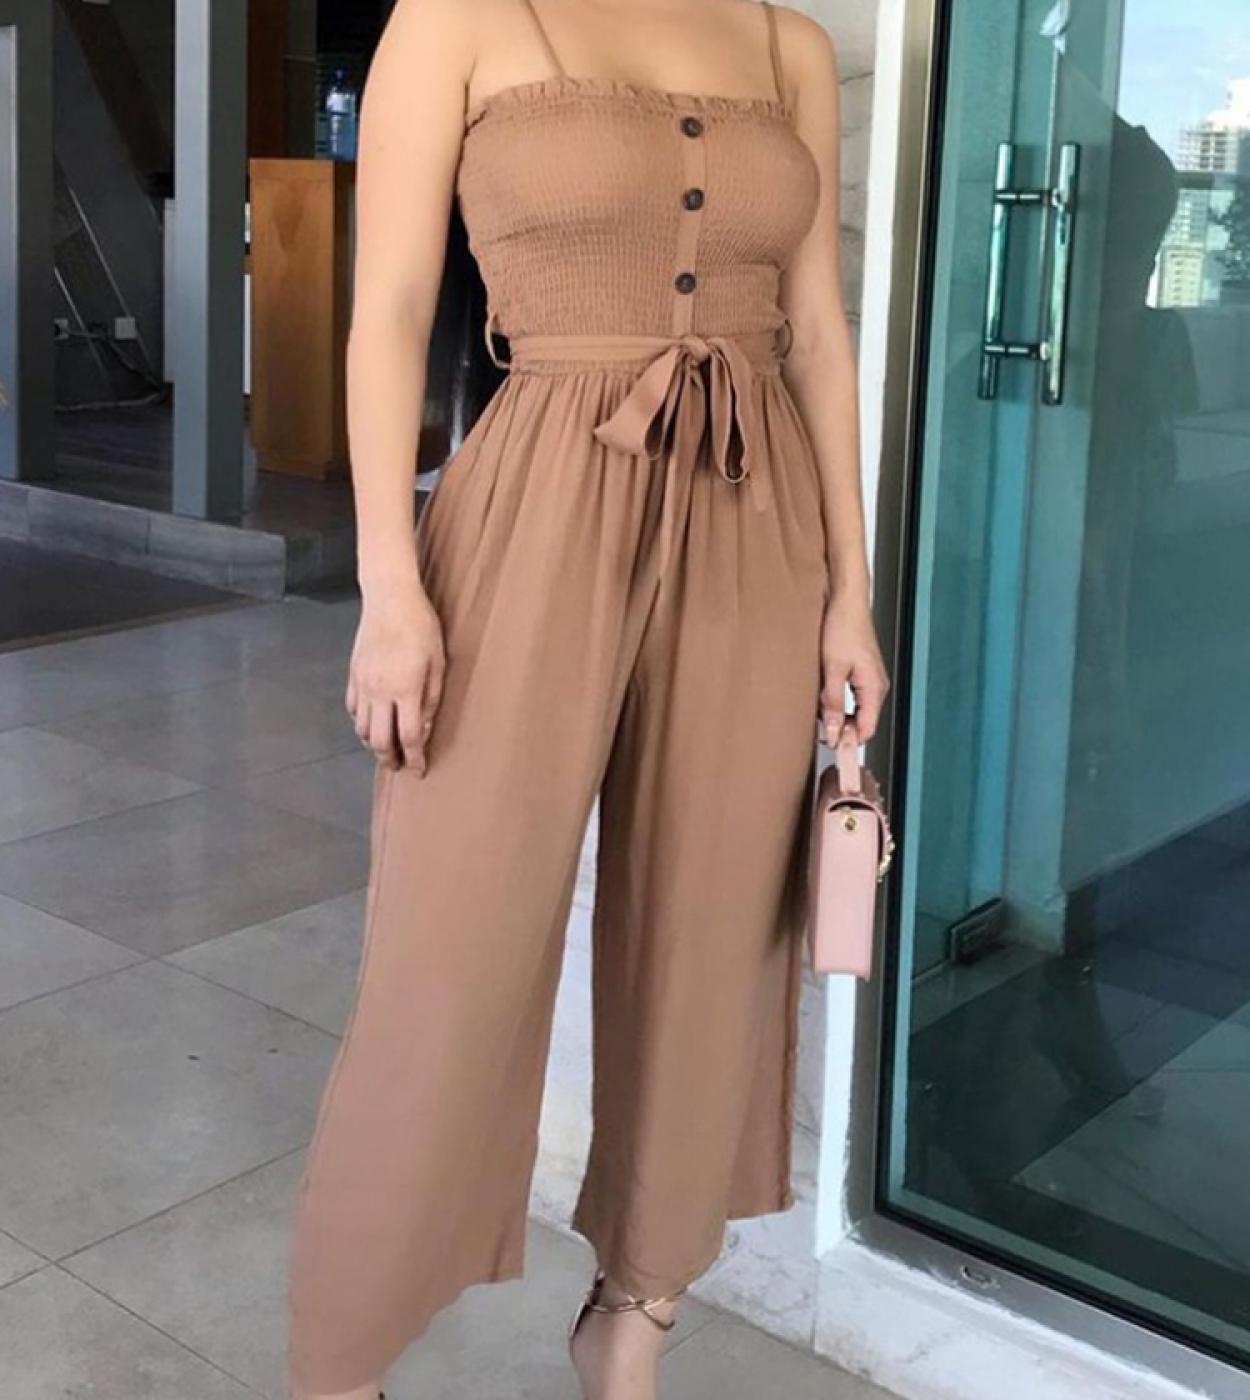 Women Spaghetti Strap Tied Detail Buttoned Shirred Jumpsuit Outfit Clothes Party Playsuit  Jumpsuits